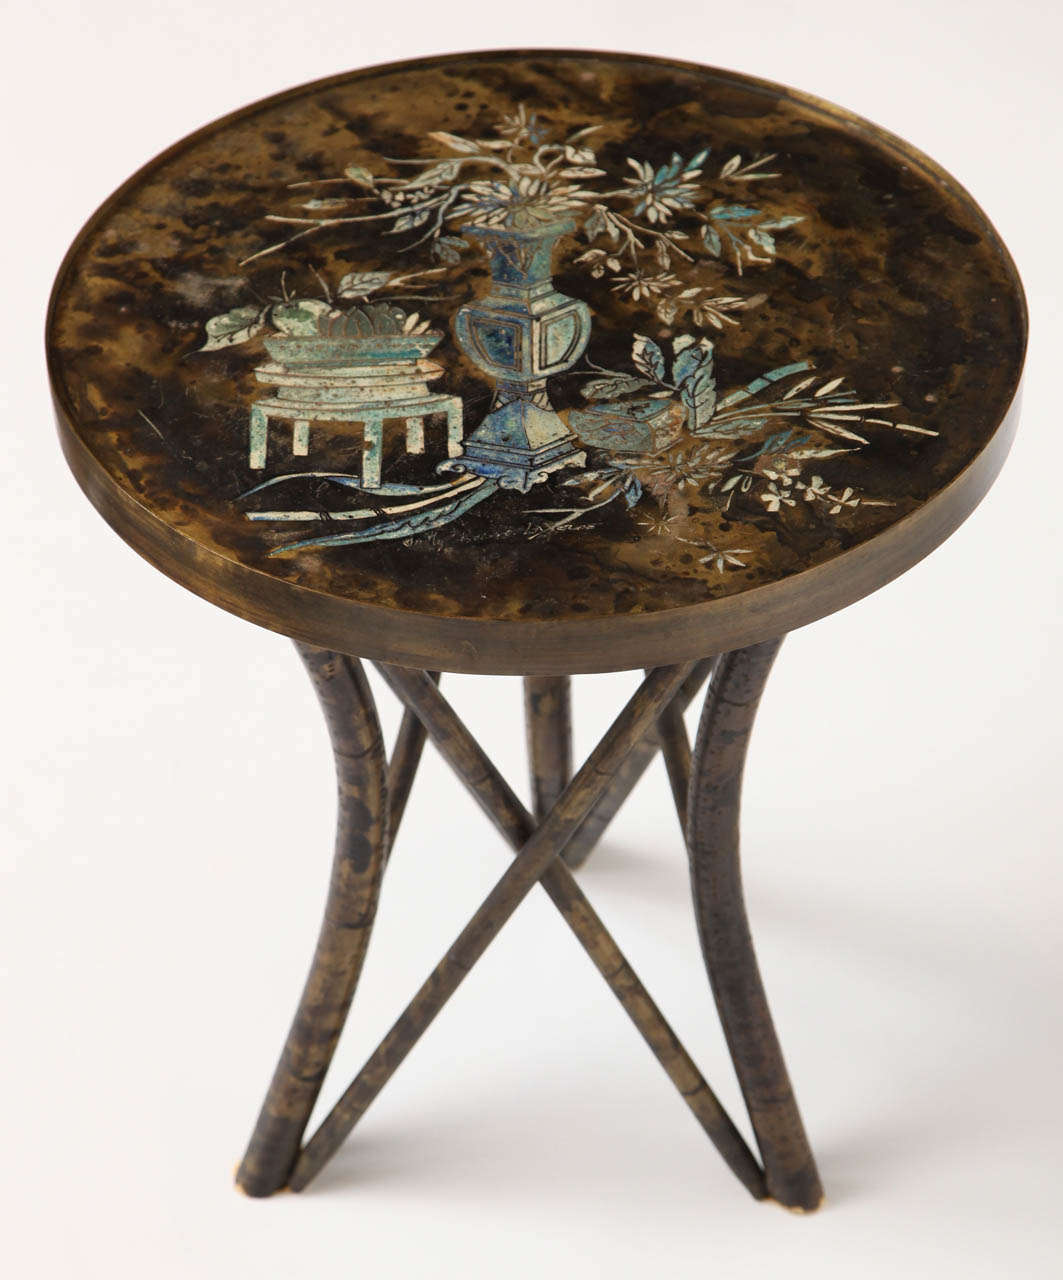 Patinated bronze side table by Philip and Kelvin LaVerne, with acid-etched relief motifs on the tabletop.

Signed 